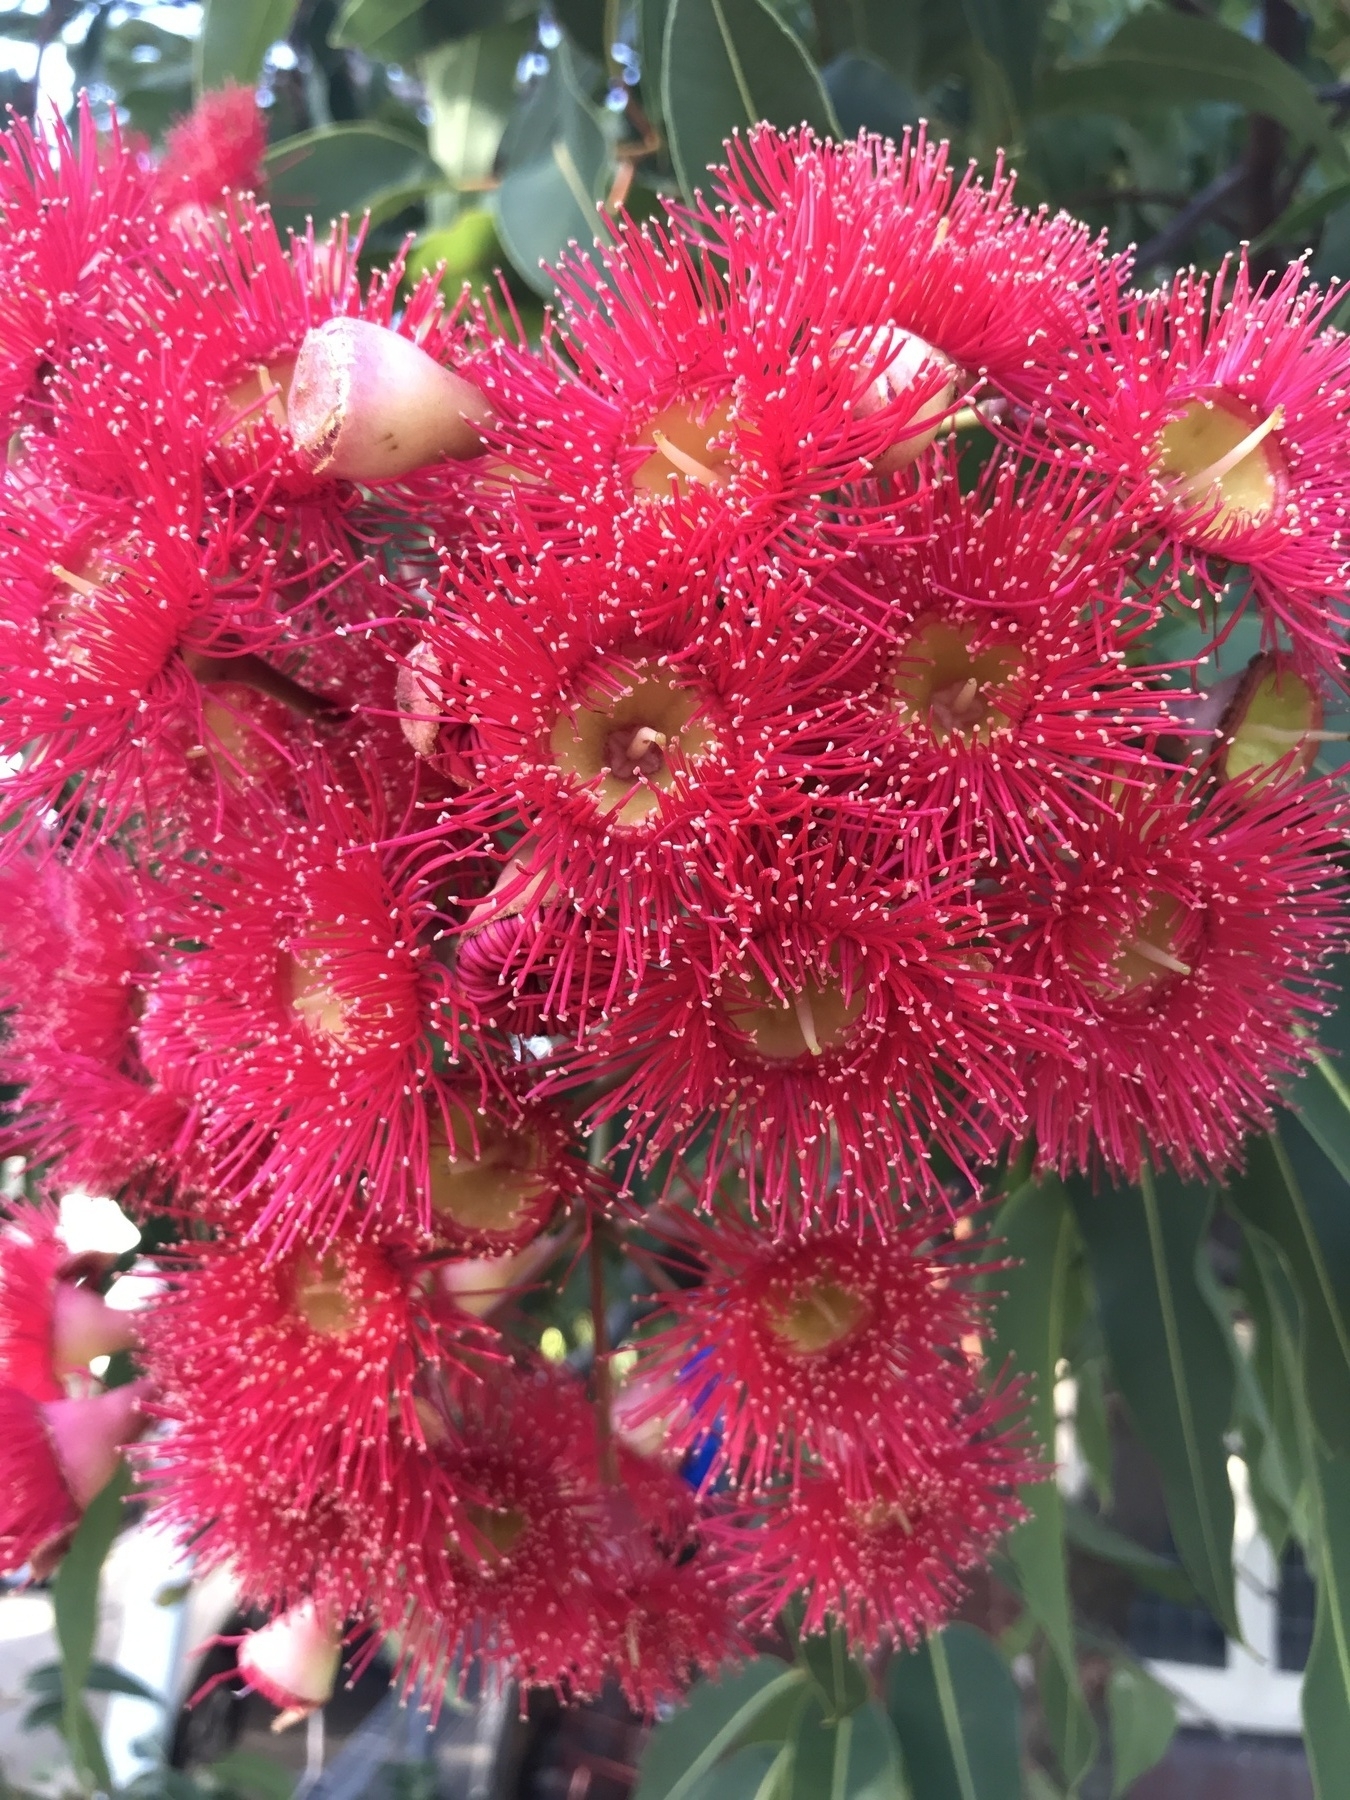 A close-up photo of a cluster of gum tree flowers. Each flower consists of a cup shape which will later harden into a gumnut. Most are still in the flower stage, with a thick fringe of short, red filaments topped by cream anthers round the edge of the open cup. Each flower has a single cream stigma rising from the heart. One or two flowers have shed their filaments and closed off the cup with a lid. These cups, or nuts, are off-white in colour, with a faint stain of purple in a band around the top.